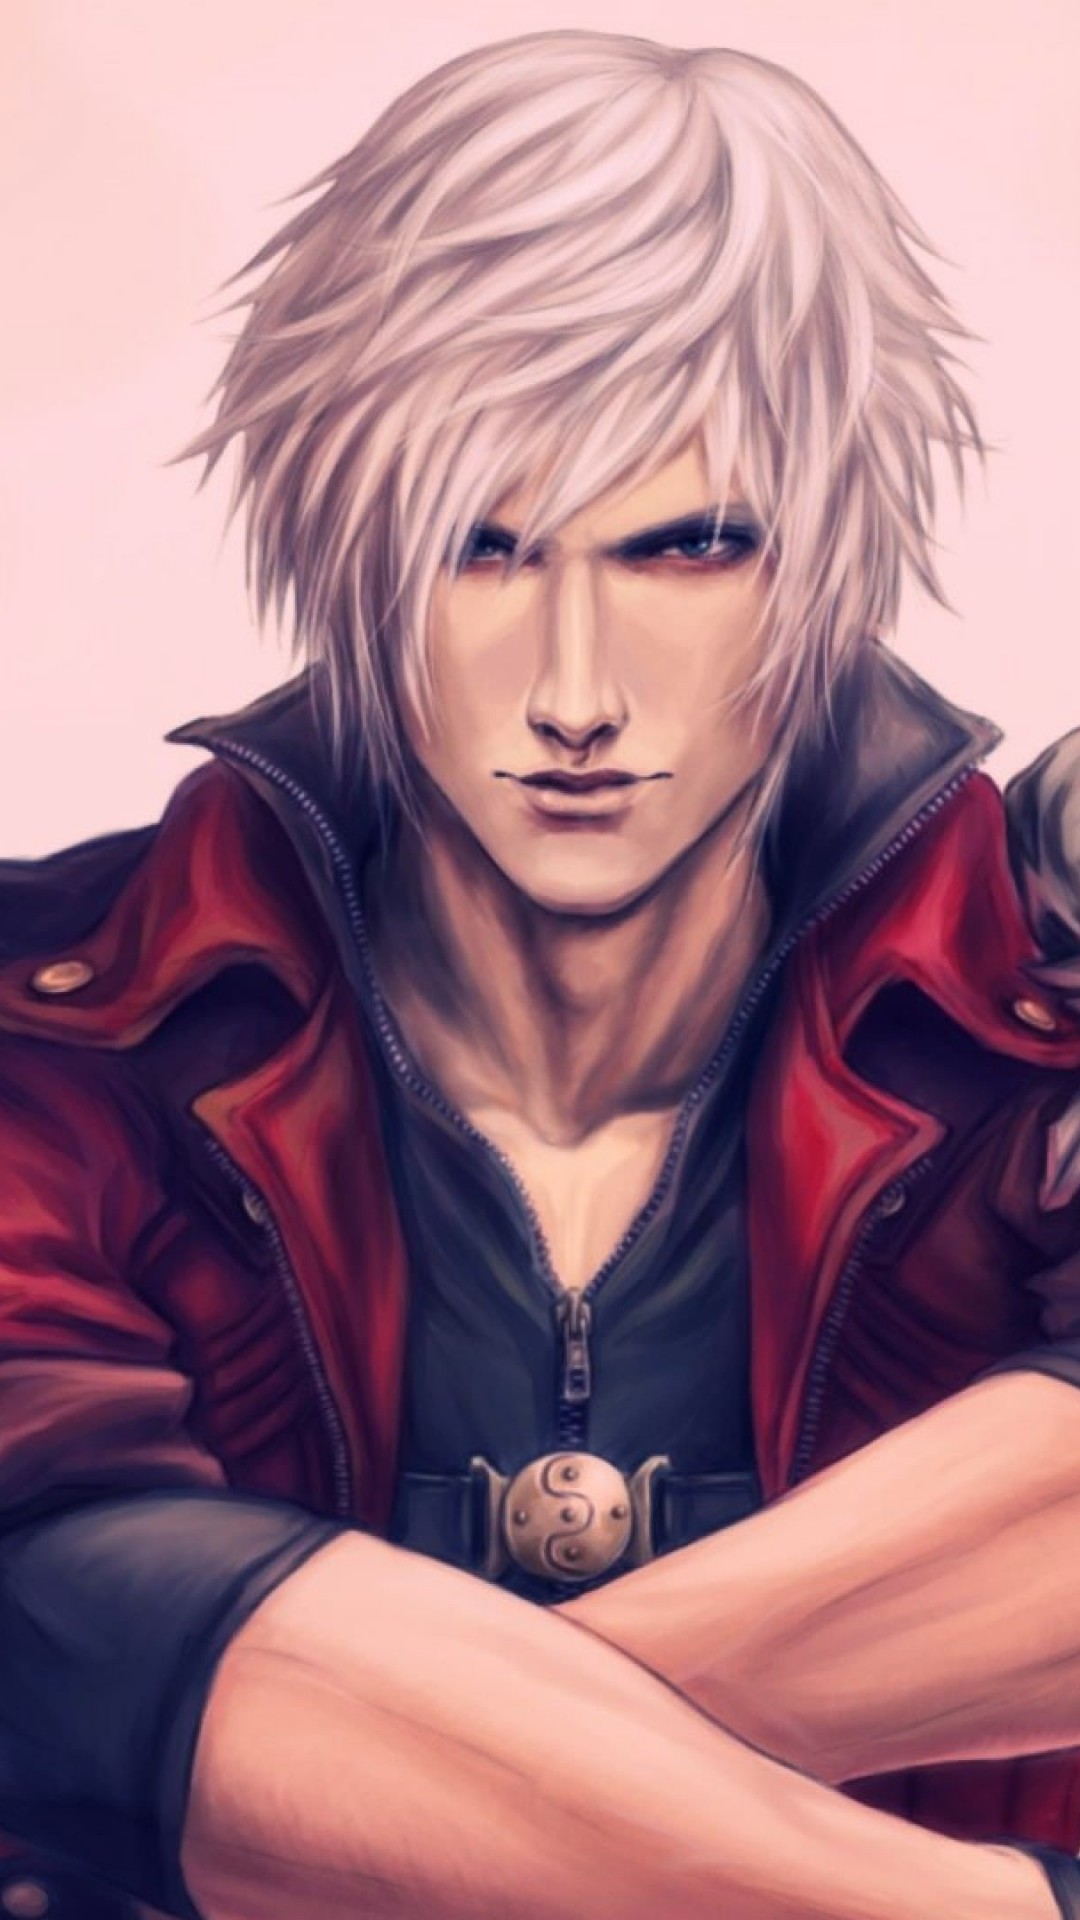 Dante - Devil May Cry Wallpaper for SAMSUNG Galaxy Note 3